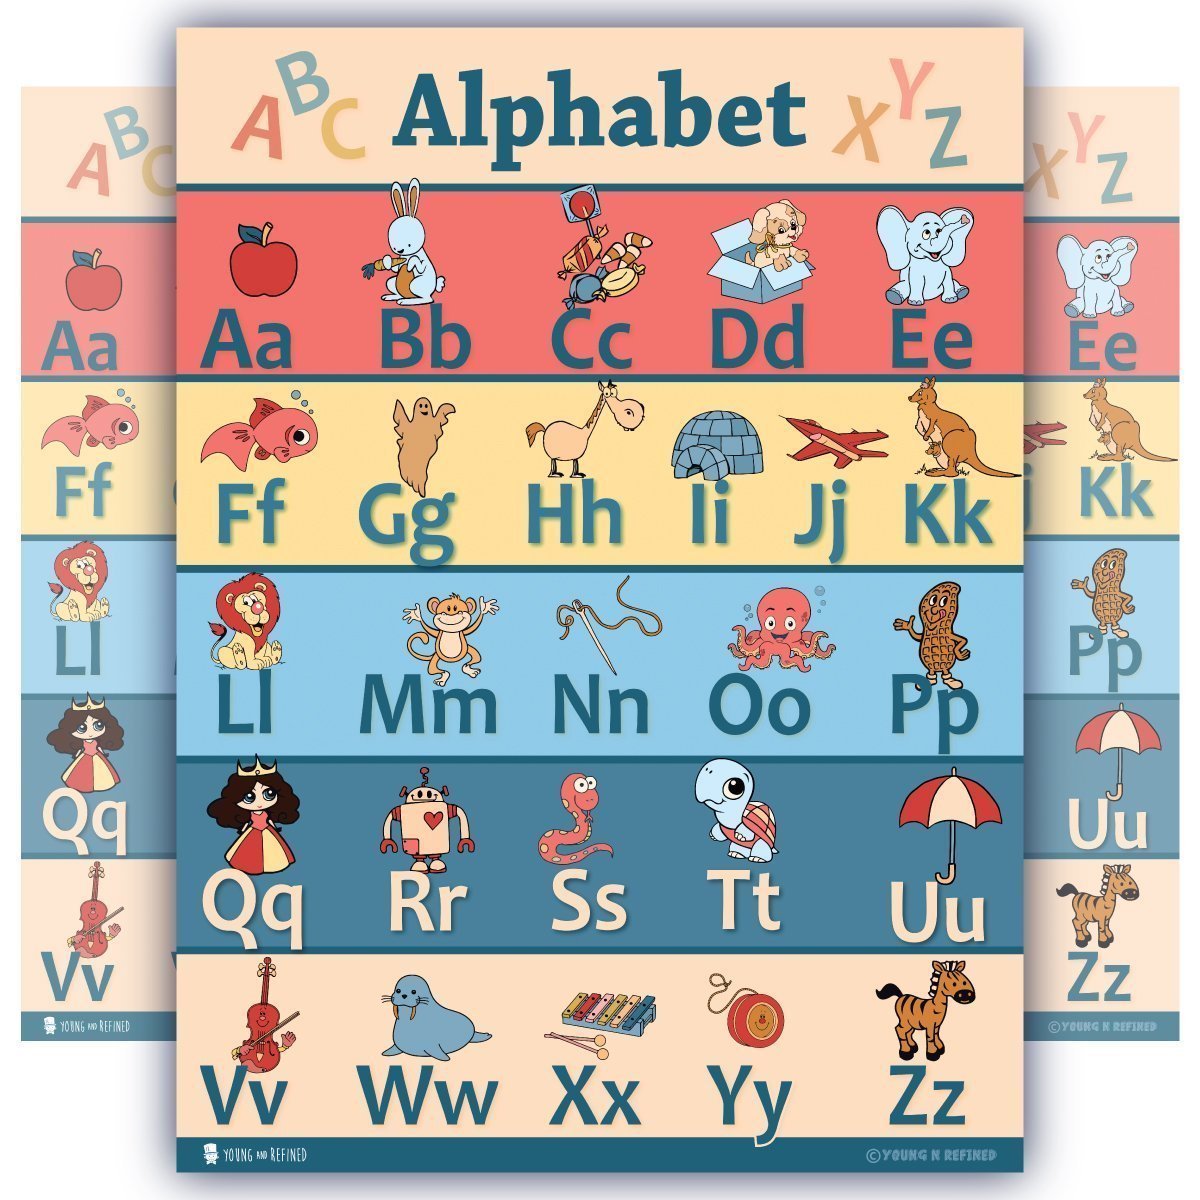 learning-colorful-abc-chart-poster-preschool-classroom-young-n-refined